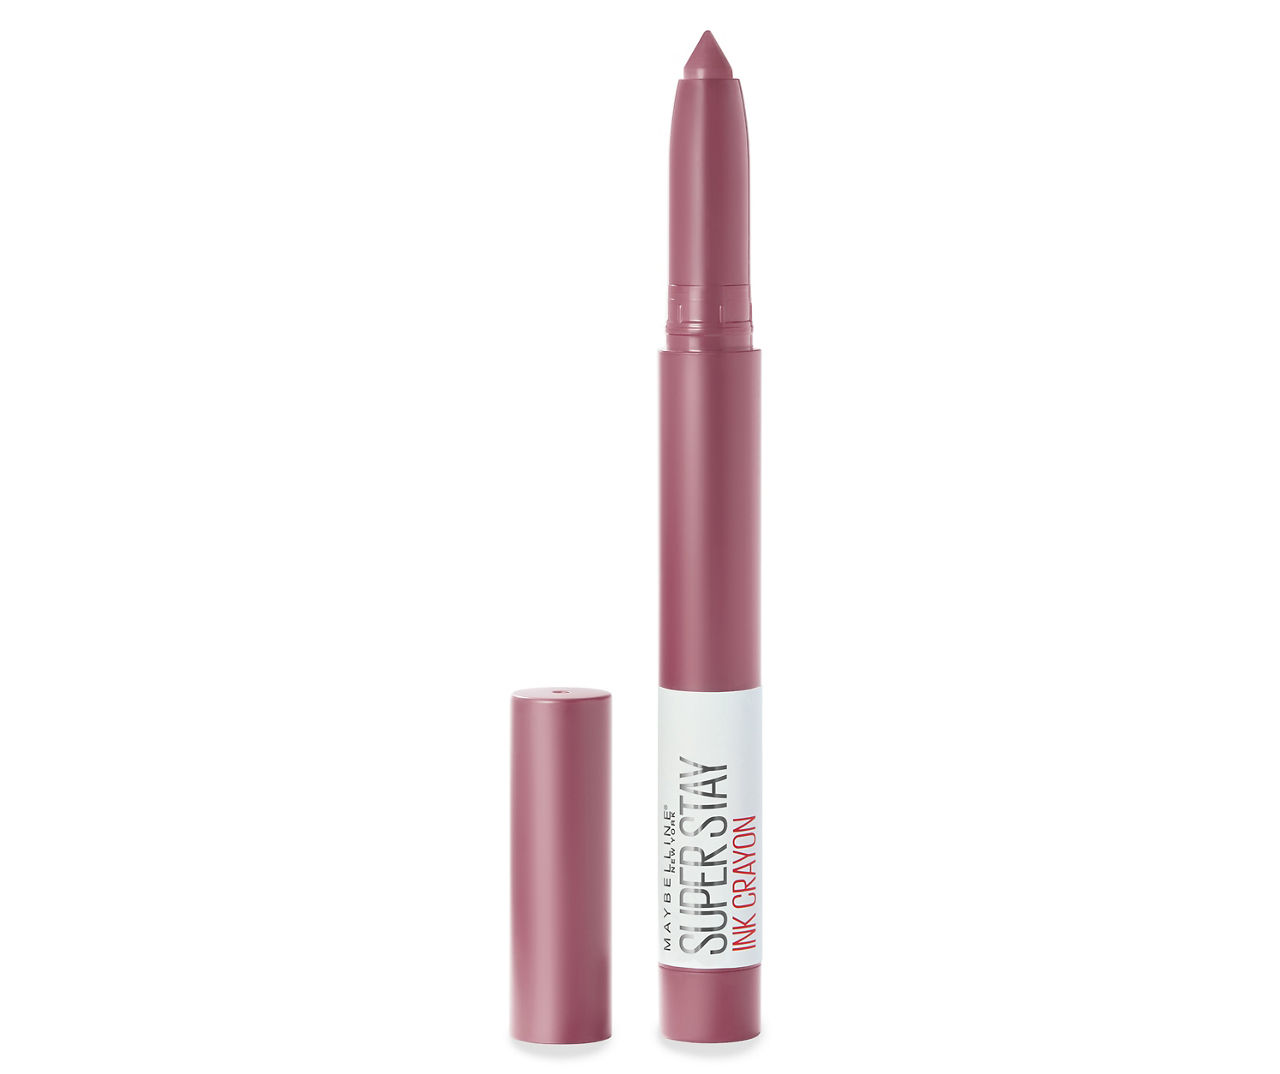 Superstay Ink Crayon Lipstick in Stay Exceptional